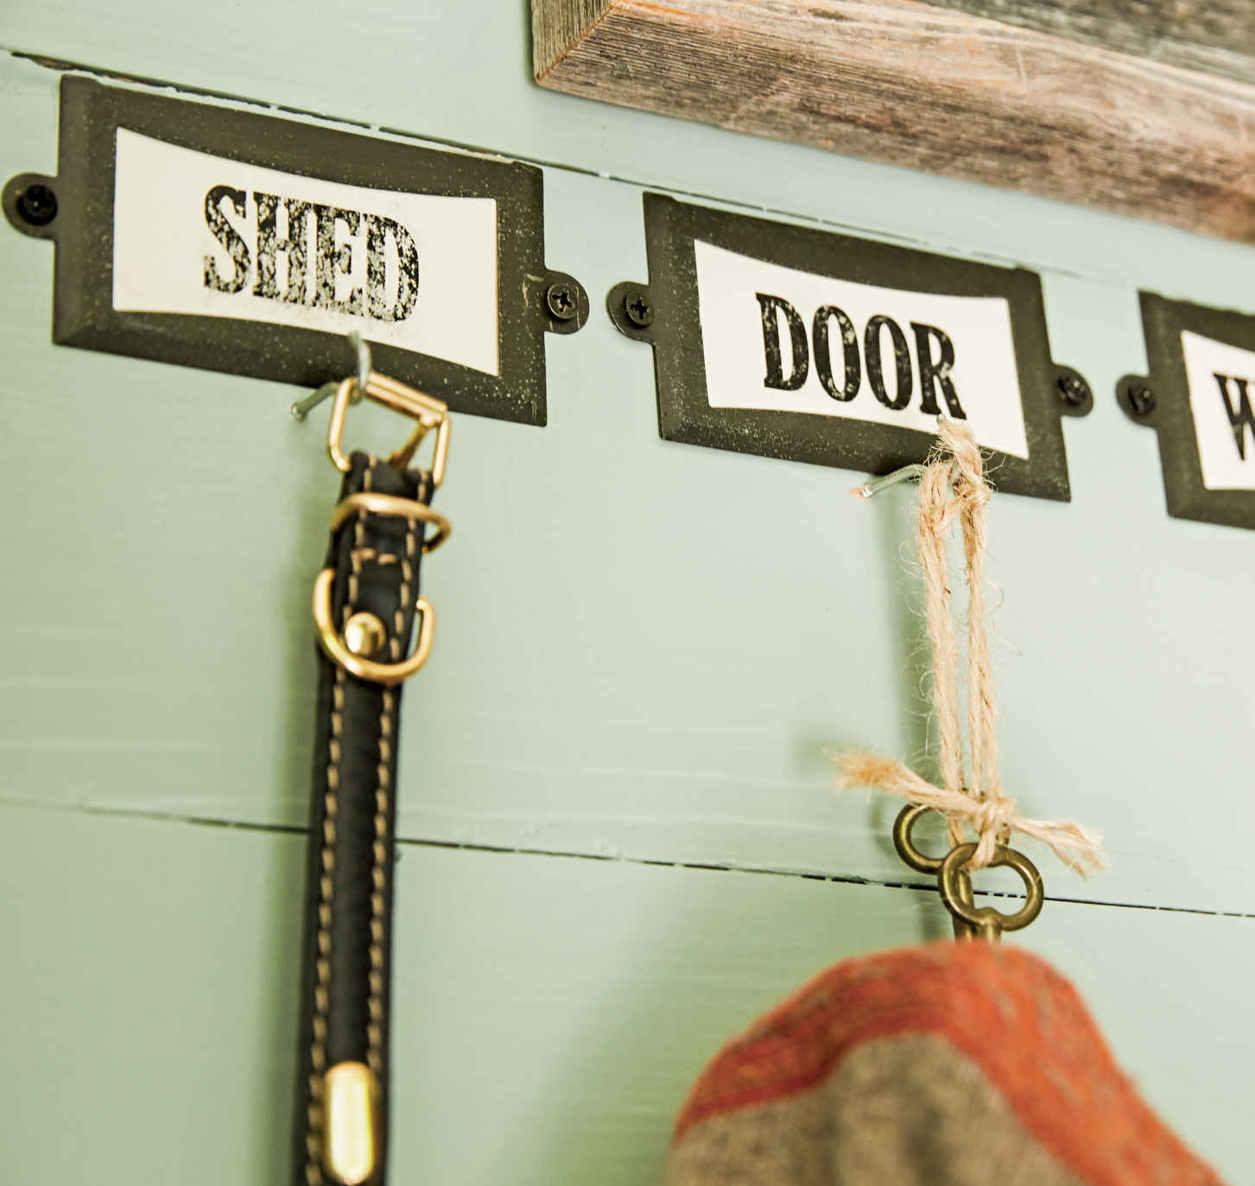 VINTAGE ACCENTS. Labeling hooks in an entryway is helpful, but when done as thoughtfully as this, it can also become a decor boost. These were made using metal holders and printed labels that have all the charm of an old schoolhouse.